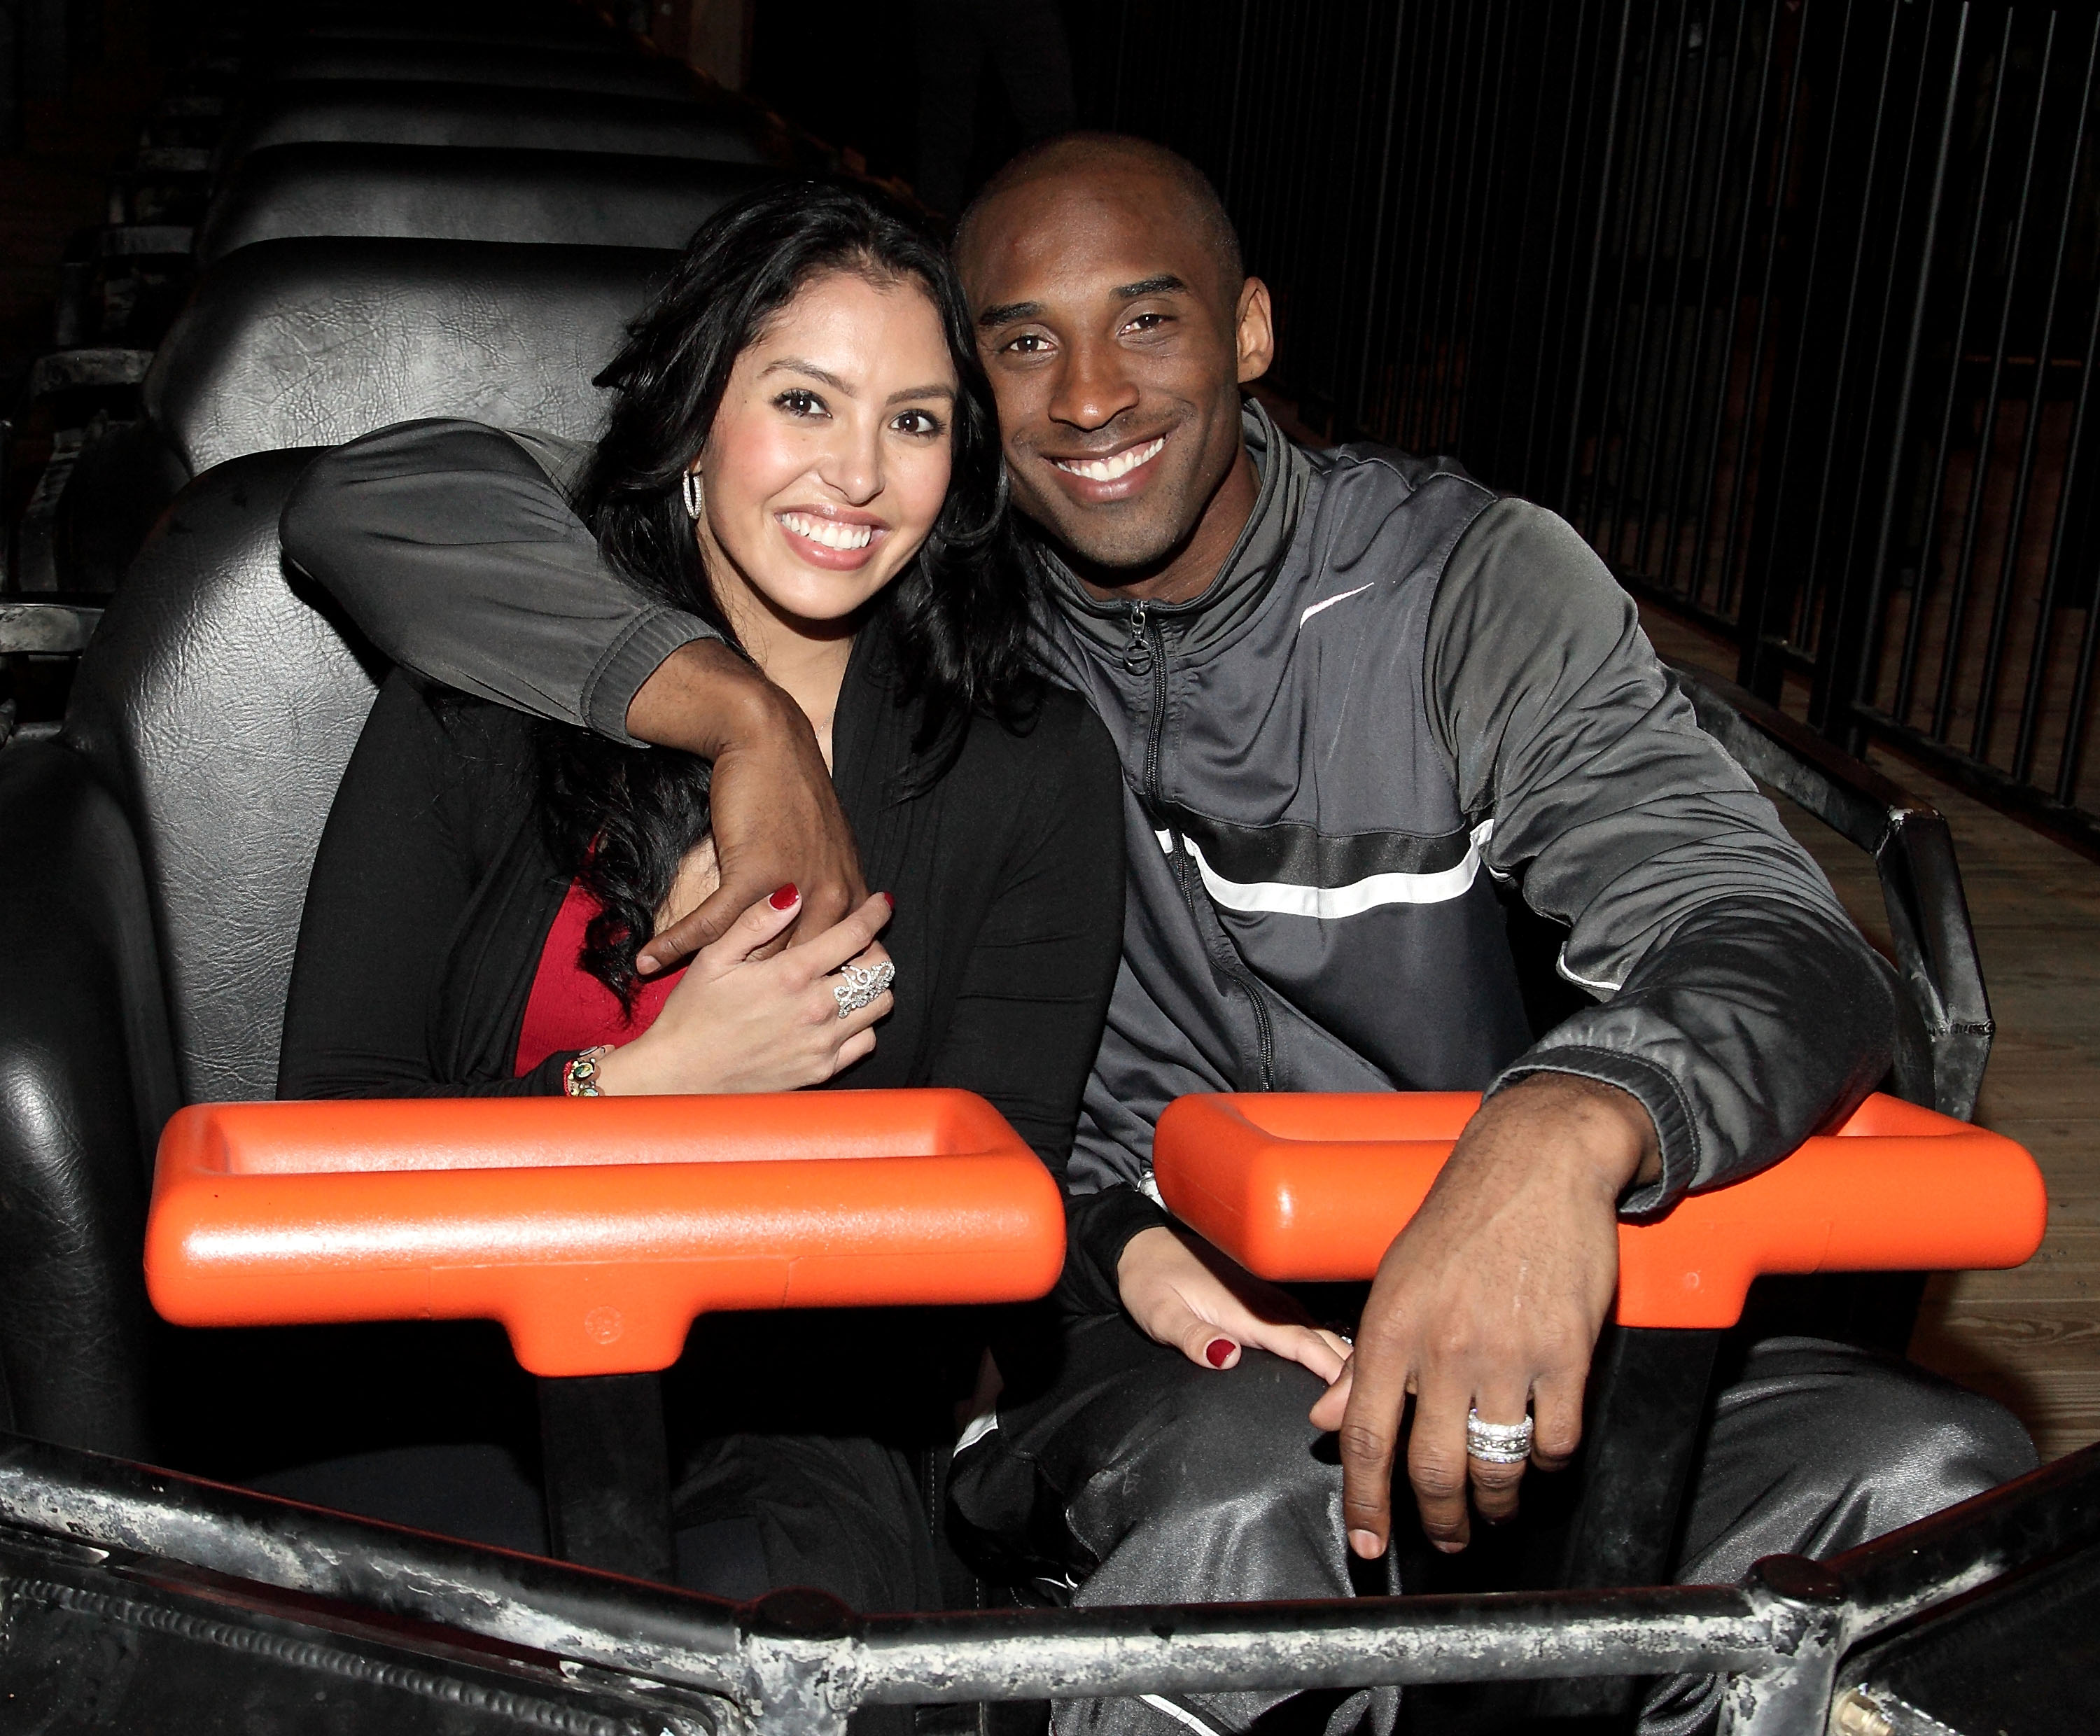 Kobe Bryant and Vanessa Bryant on June 28, 2009 in Valencia, California | Source: Getty Images